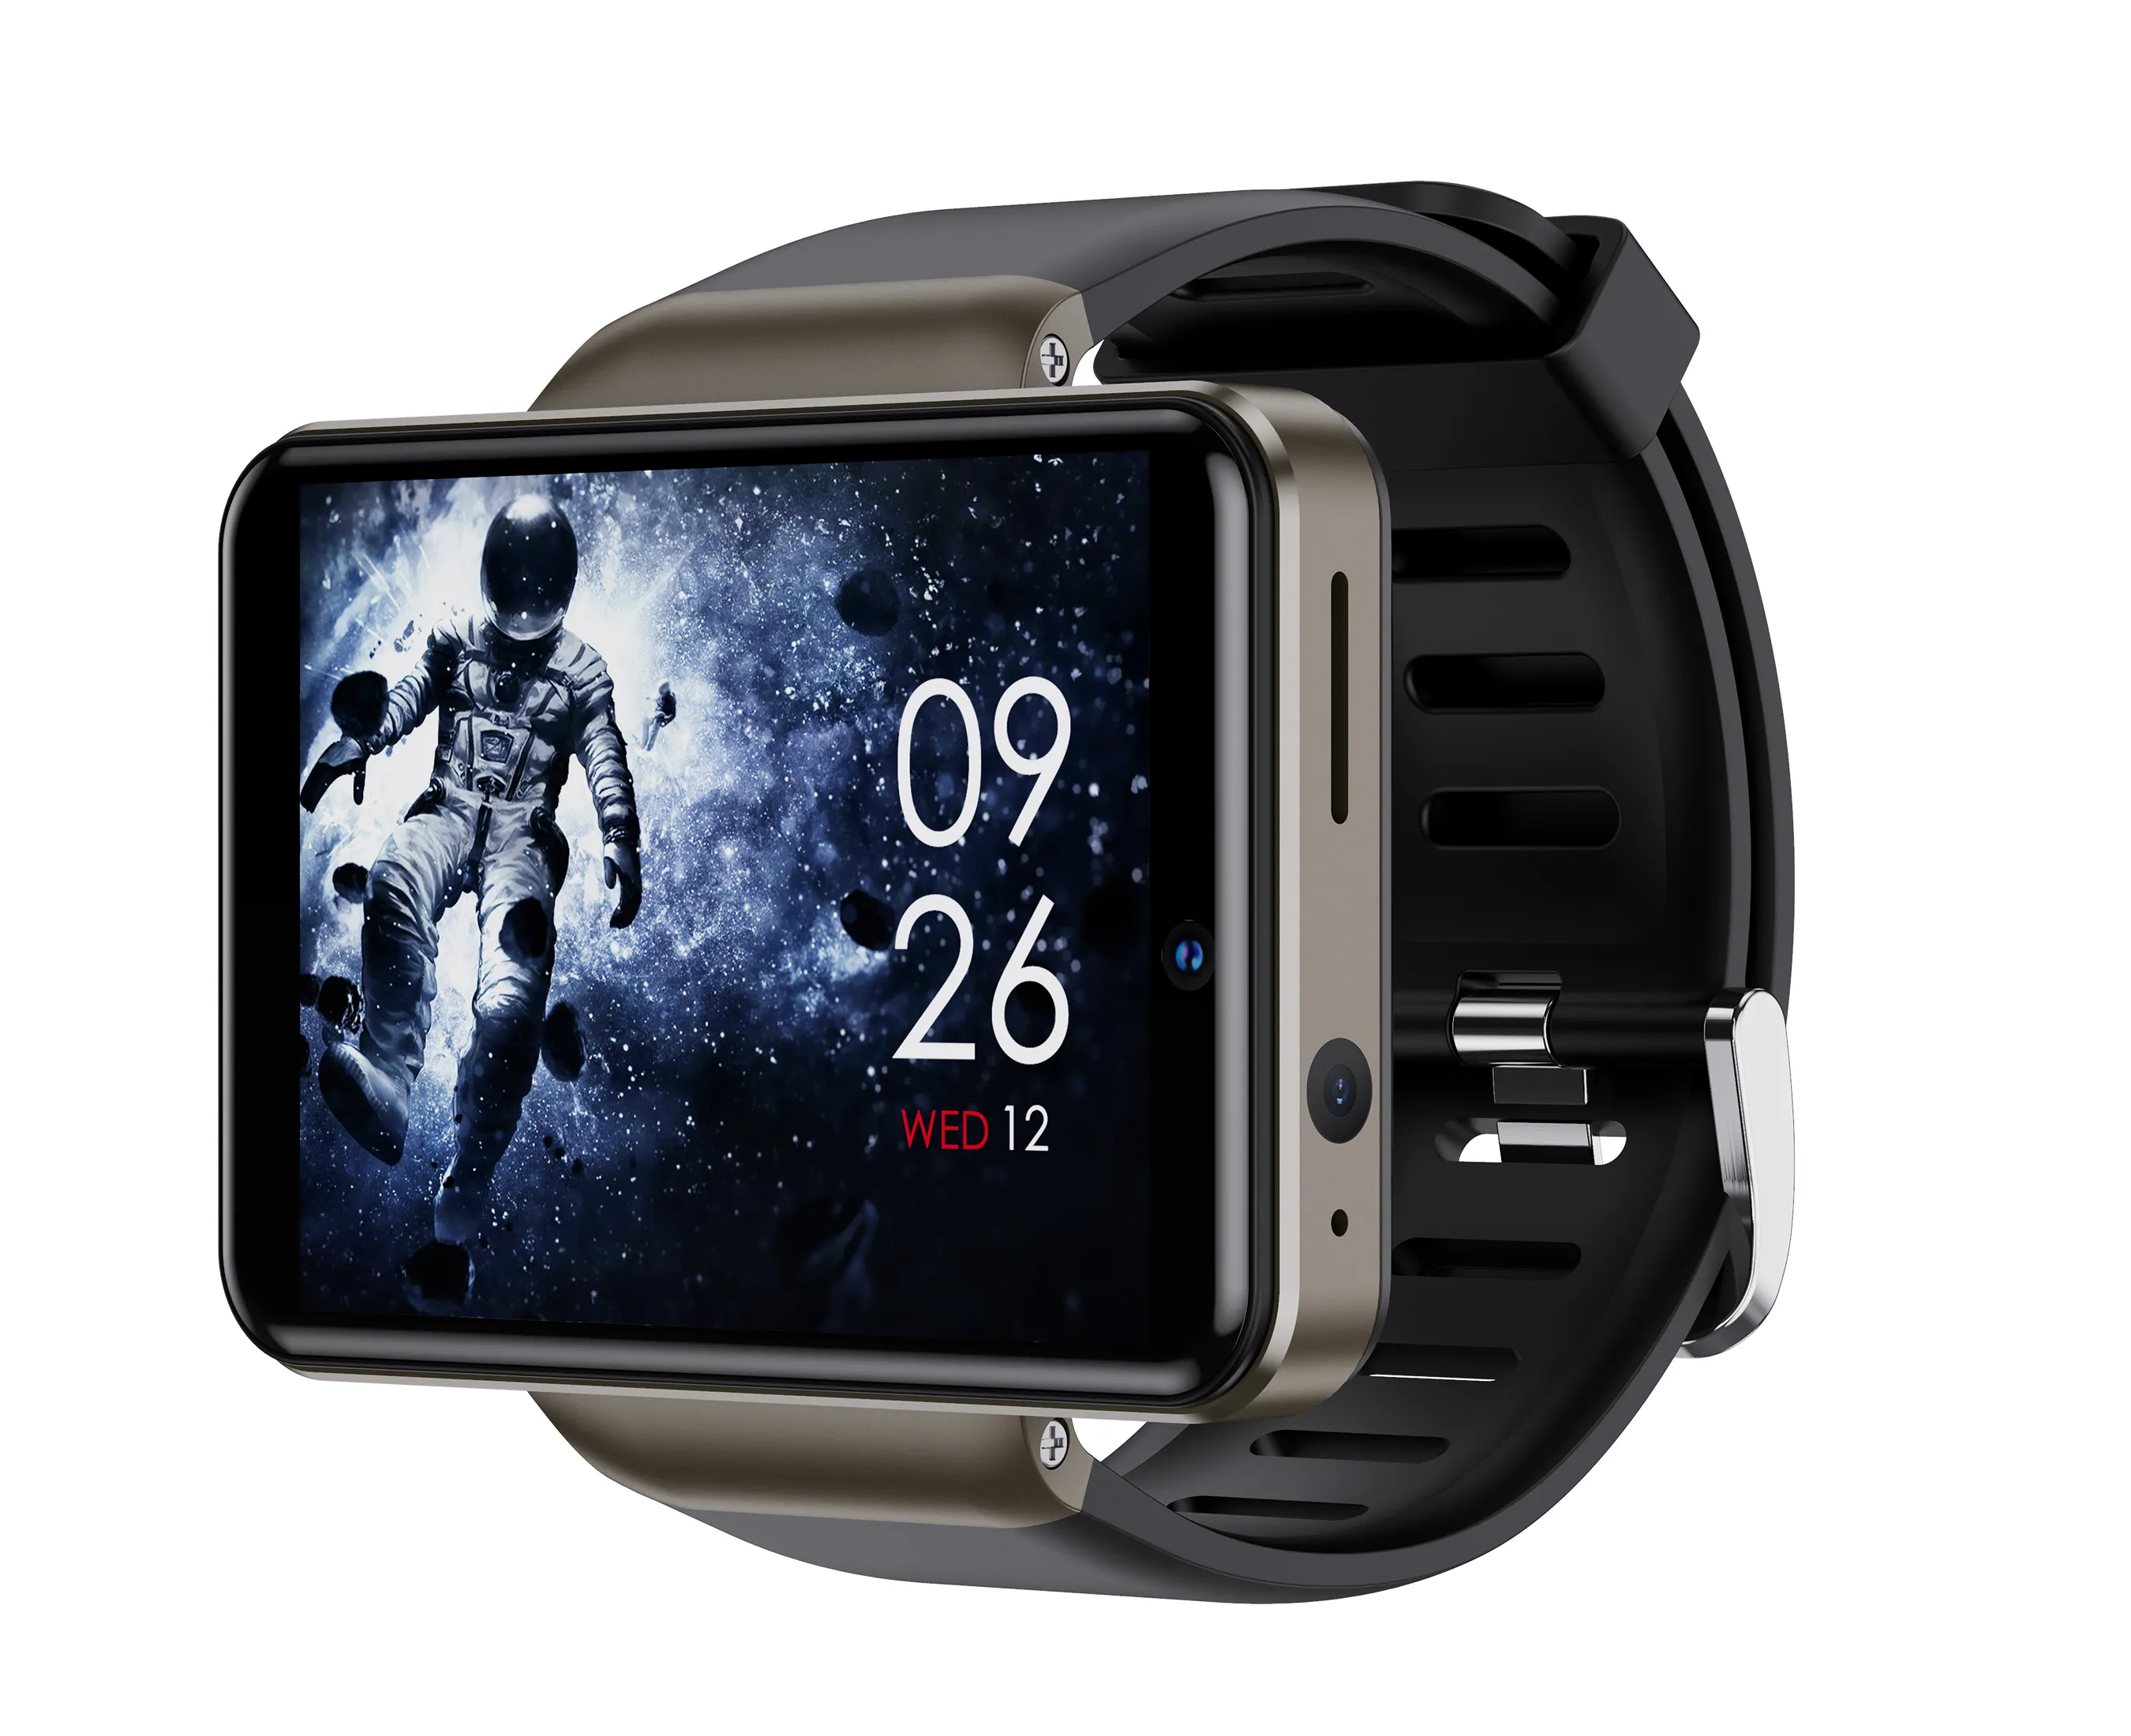 Factory DM101 Smartwatch 2.41 inch Large Screen 2080mAh large battery Dual Cameras LTE 4G Android Smart Watch